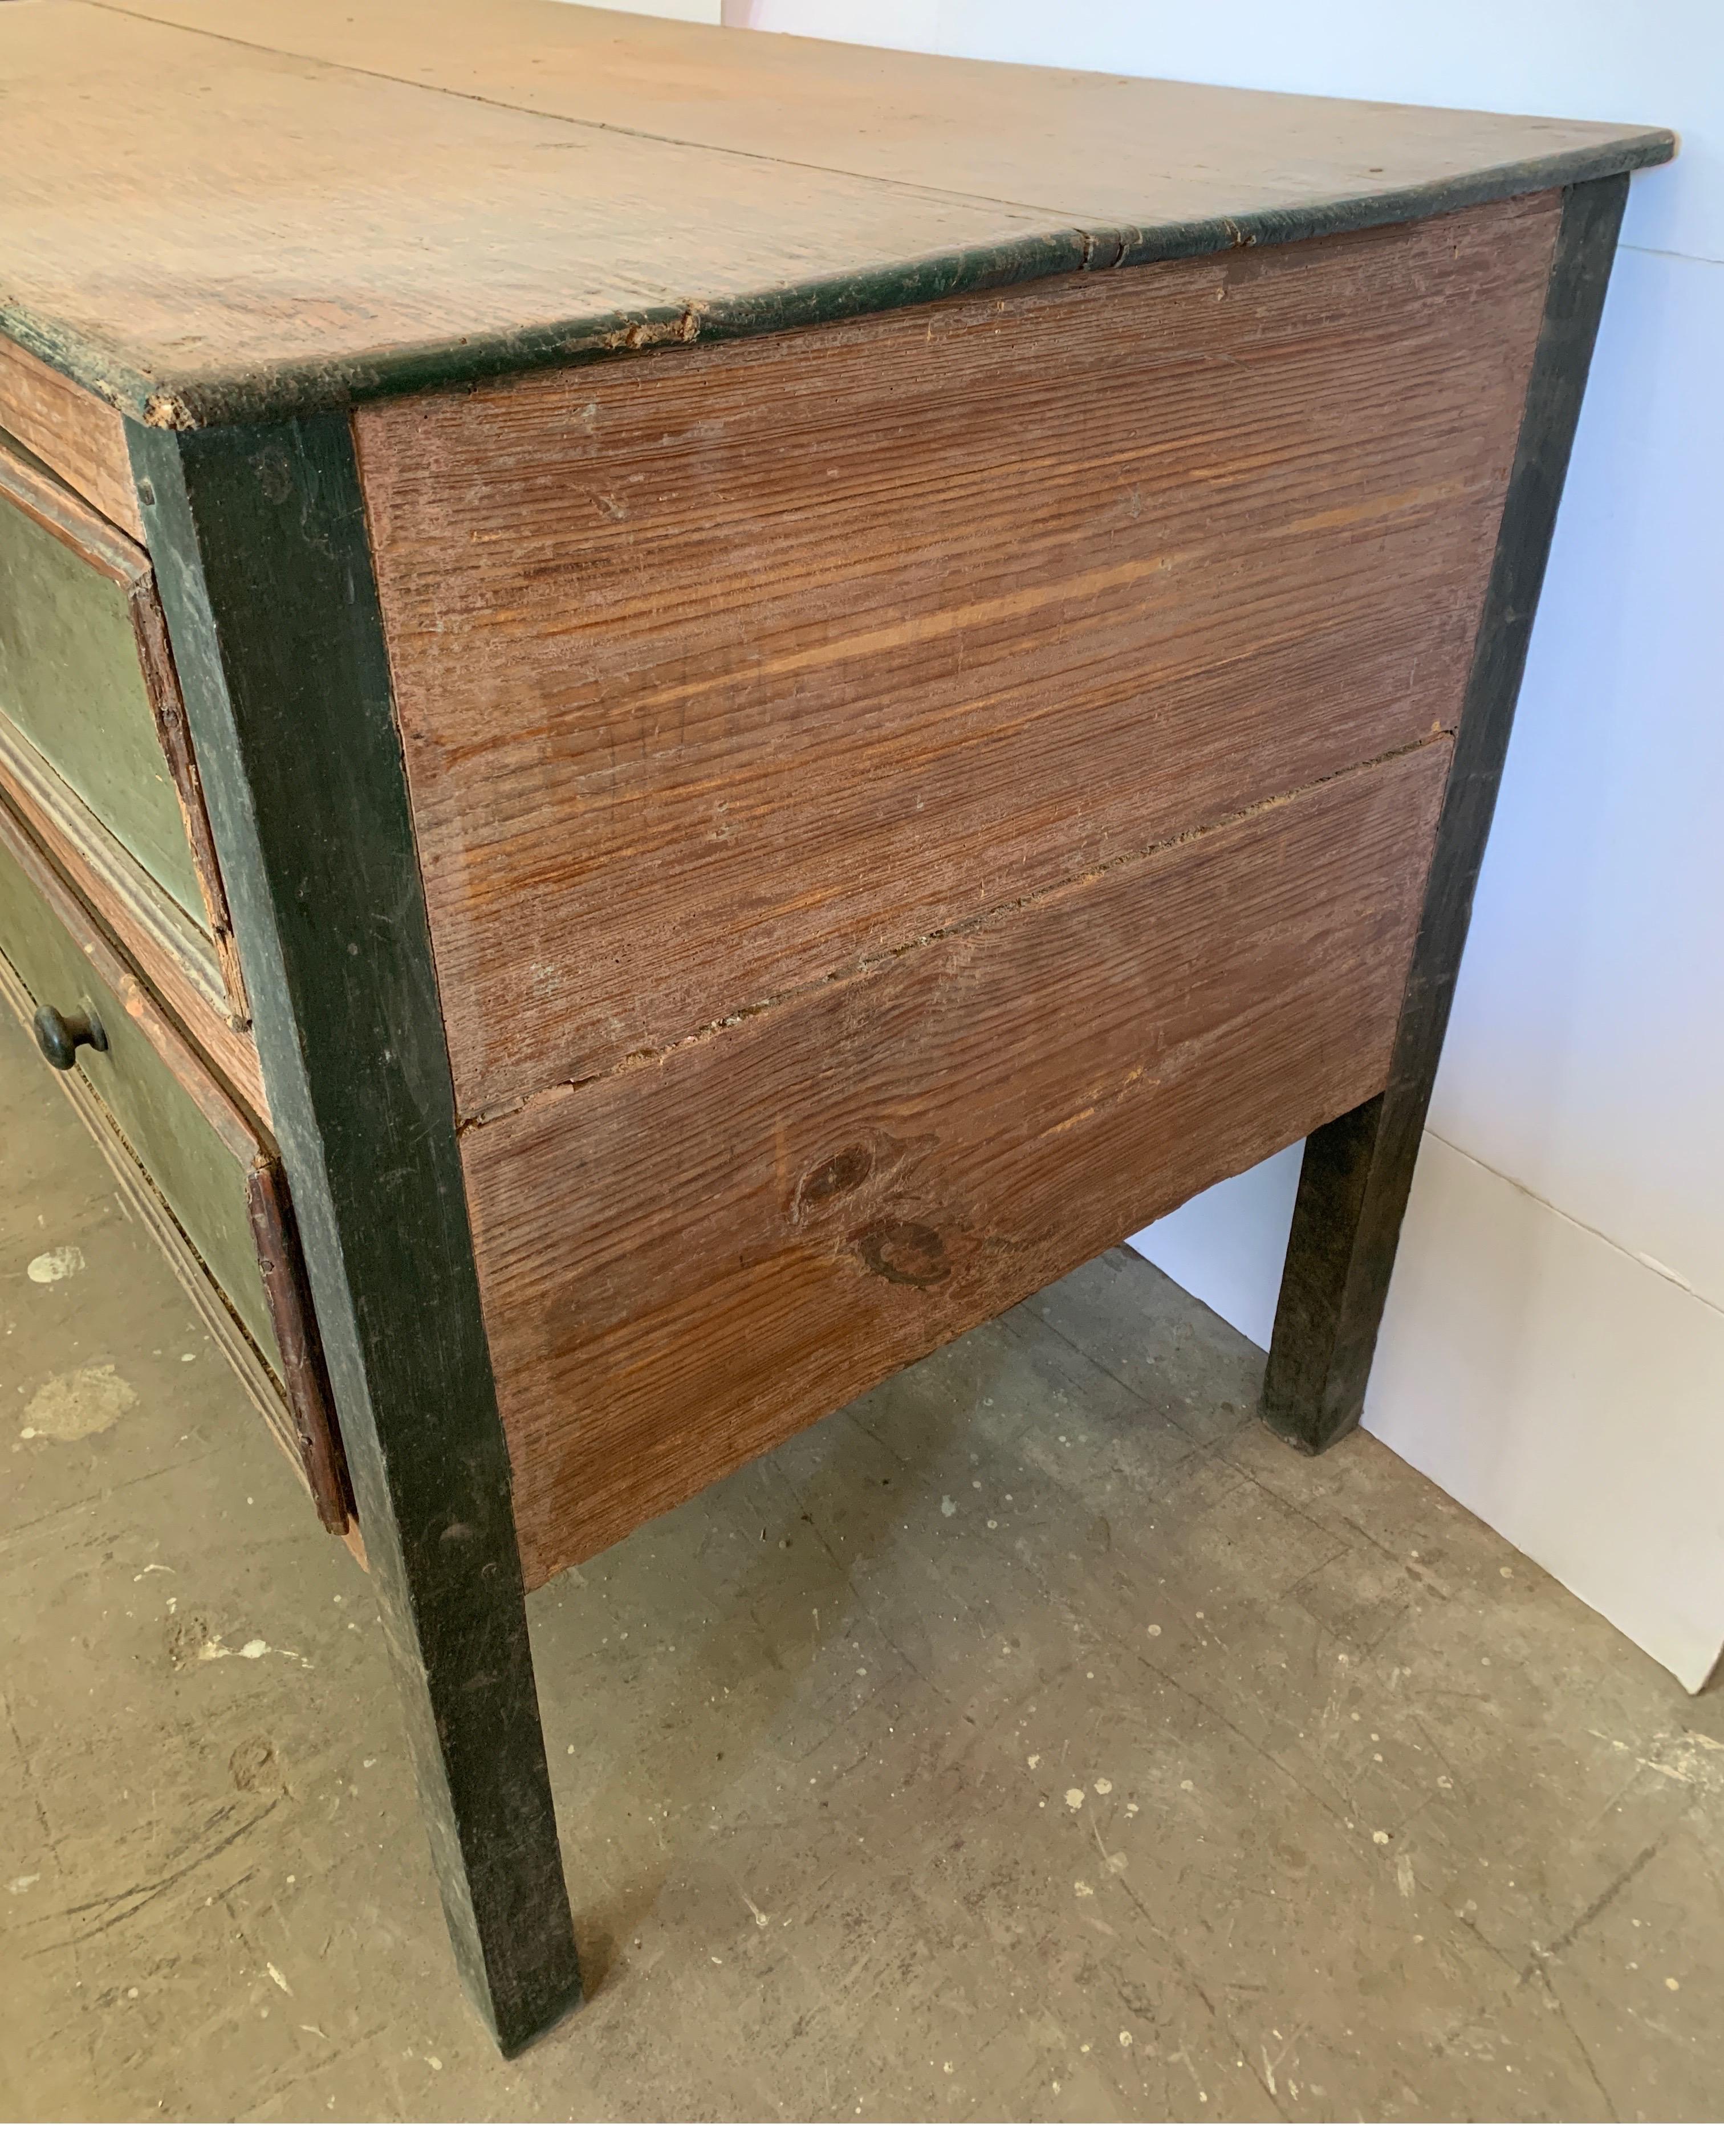 These sacristy chest were used to store robes and vestments from the Catholic Churches throughout Europe. This one has the original paint intact. The drawers are deep at 23.5 W x 27 D for lots of storage.